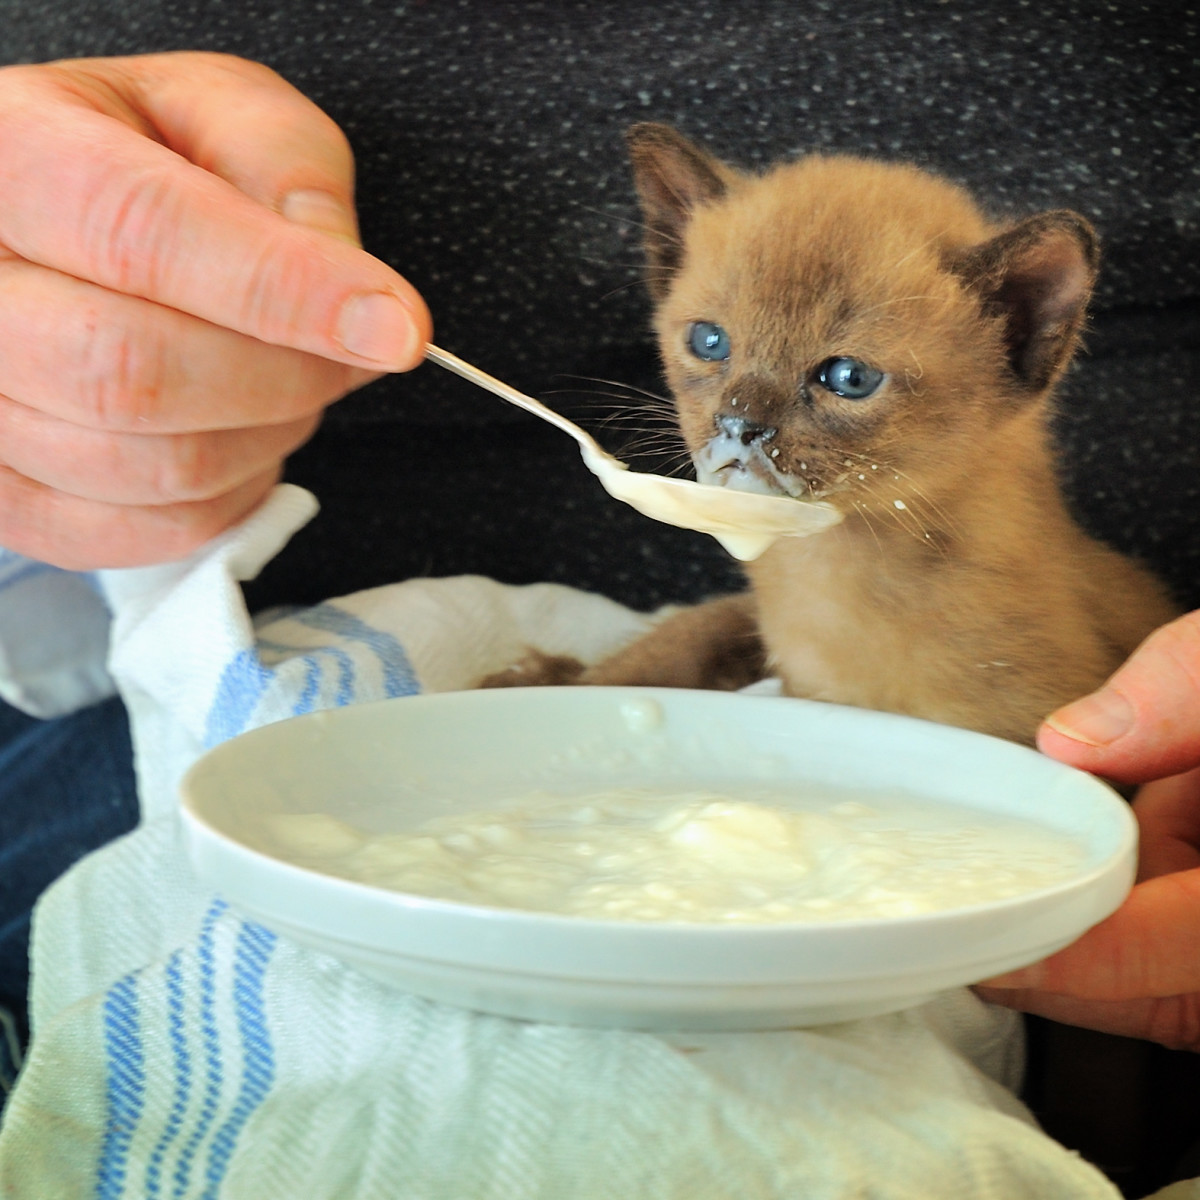 How adorable is this hungry baby kitten?